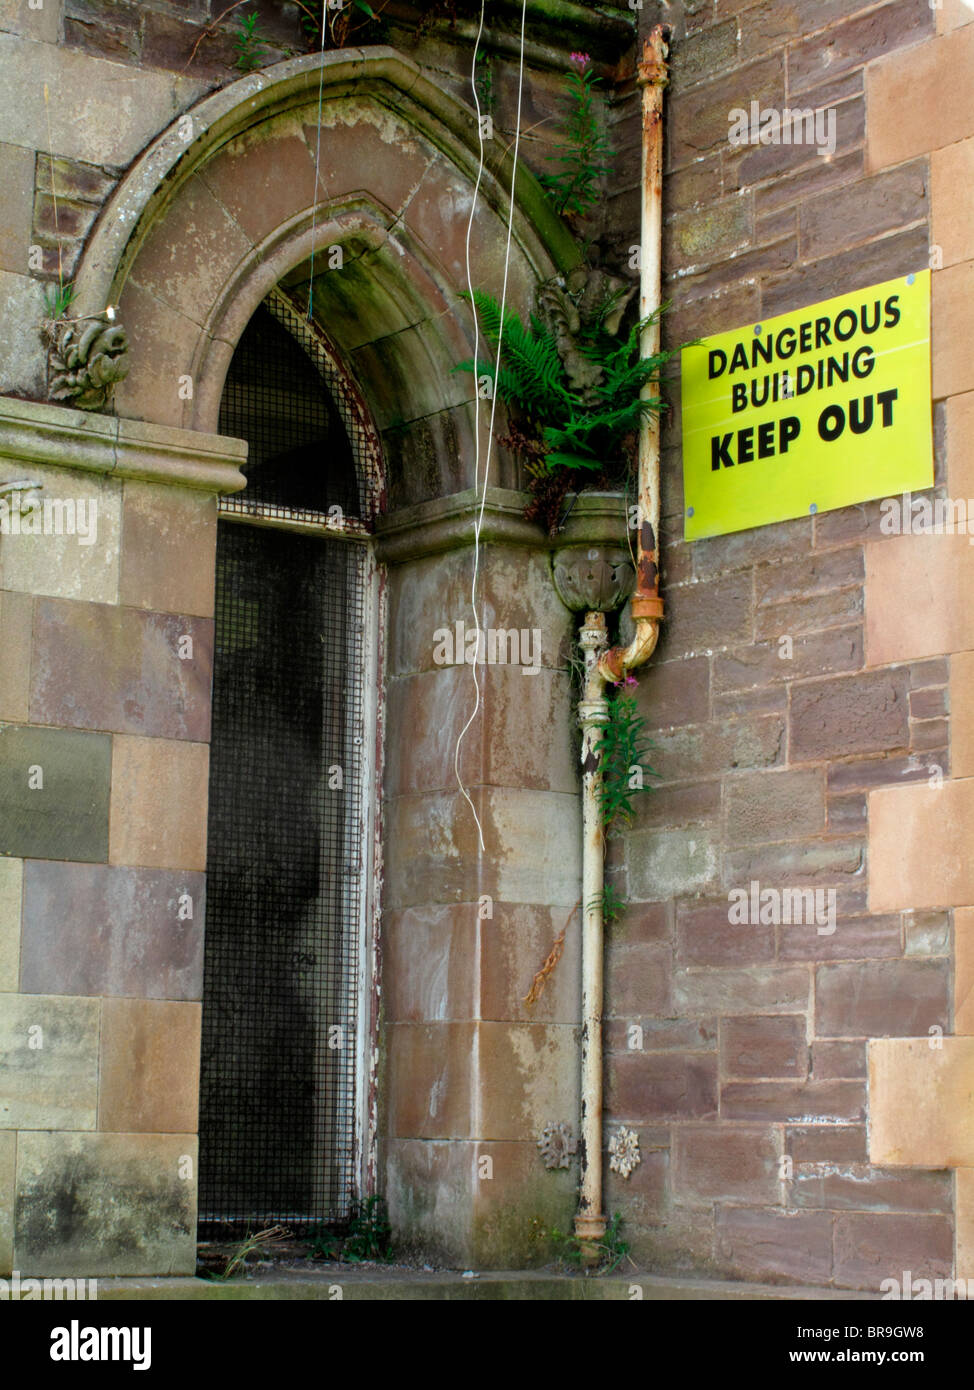 An old decrepit  Victorian building with a yellow sign - 'Dangerous building. Keep out ' stuck to its walls. Stock Photo